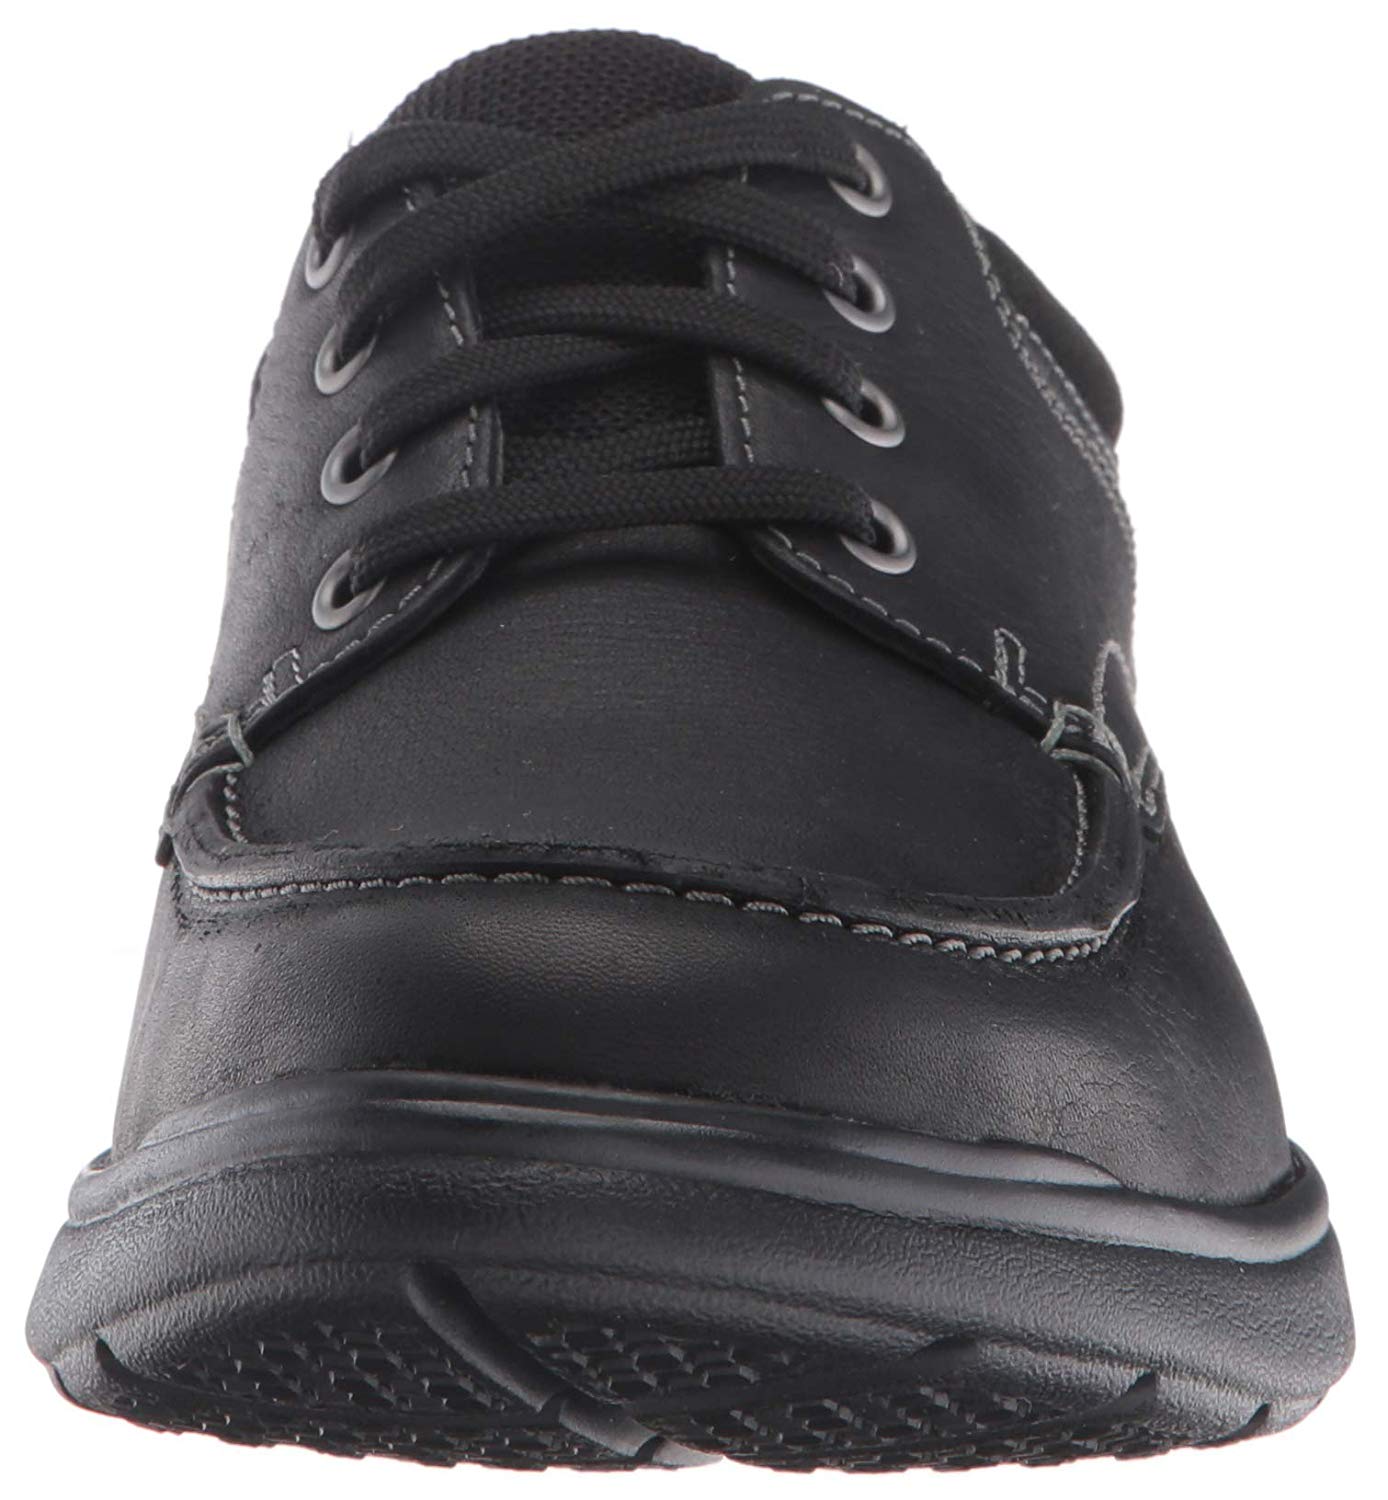 CLARKS Mens Cotrell walk Low Top Lace Up Fashion Sneakers, Black, Size ...